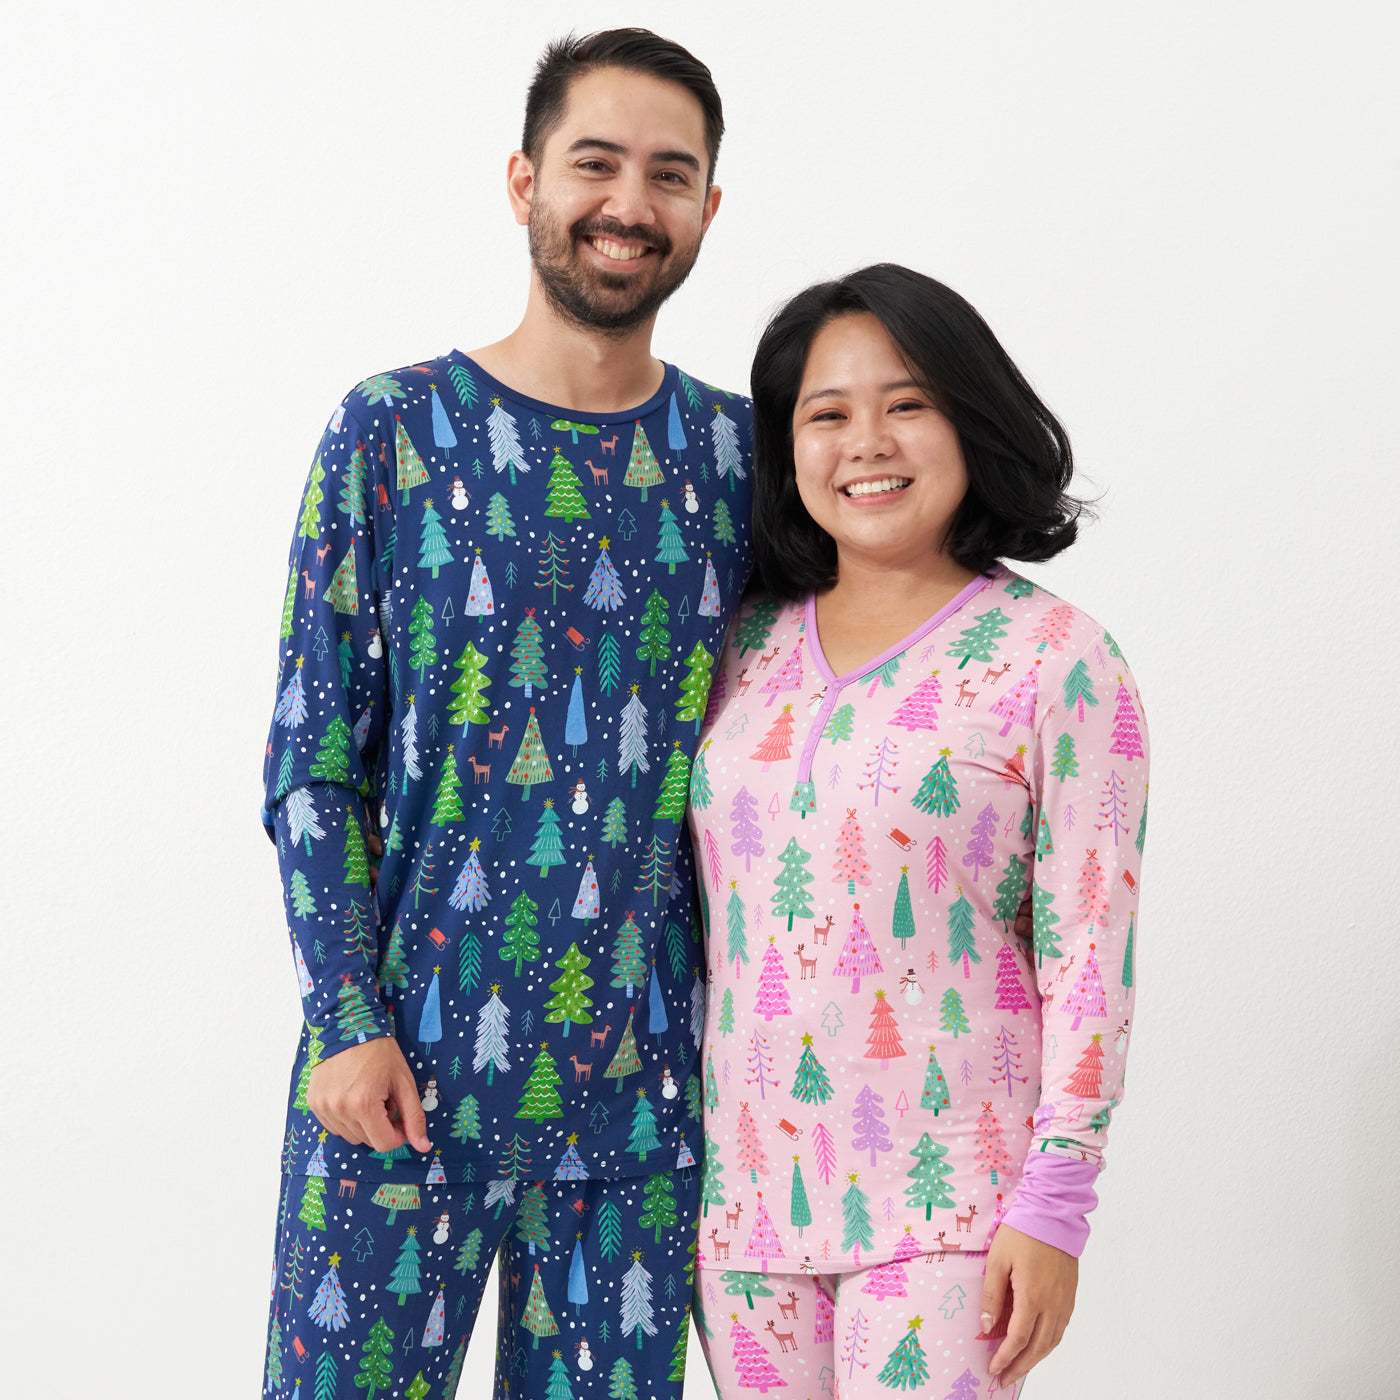 Couple posing together wearing coordinating Merry and Bright pajamas. Man is wearing Blue Merry and Bright printed pajama bottoms and a matching men's Blue Merry and Bright pajama top. Woman is wearing Pink Merry and Bright printed pajama top paired with matching women's Pink Merry and Bright printed pajama bottoms.